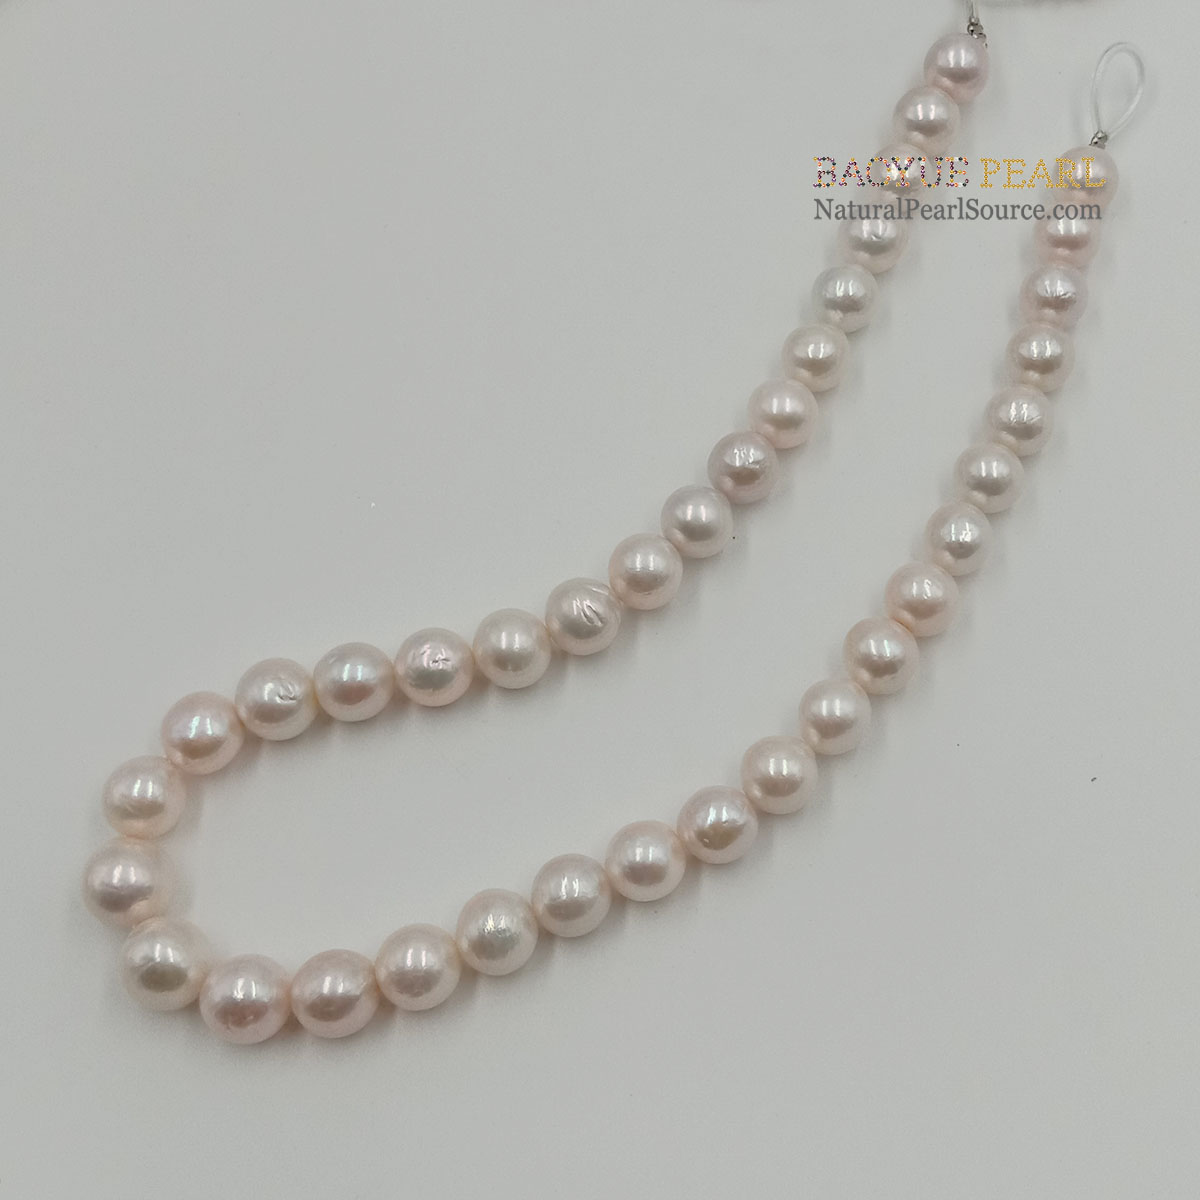 11-13 mm freshwater pearl wholesale 16 inch white round loose freshwater pearls in strand